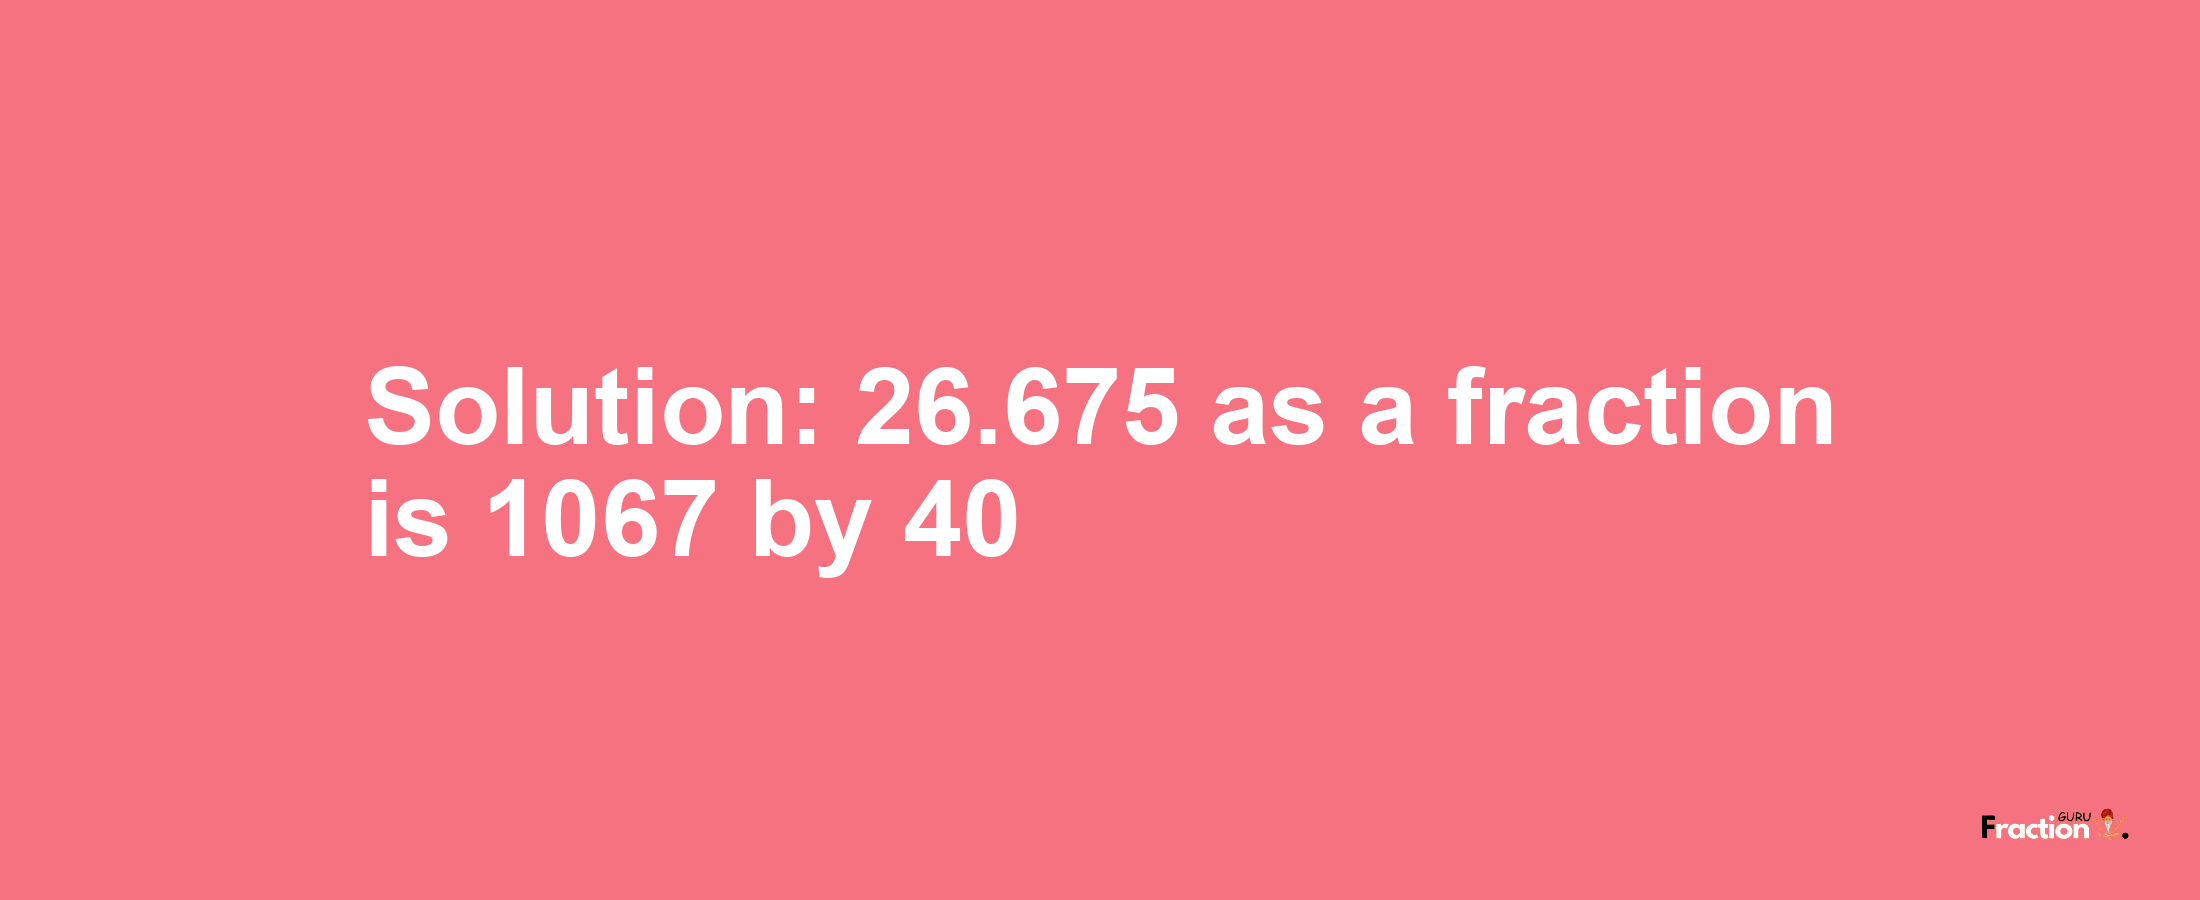 Solution:26.675 as a fraction is 1067/40